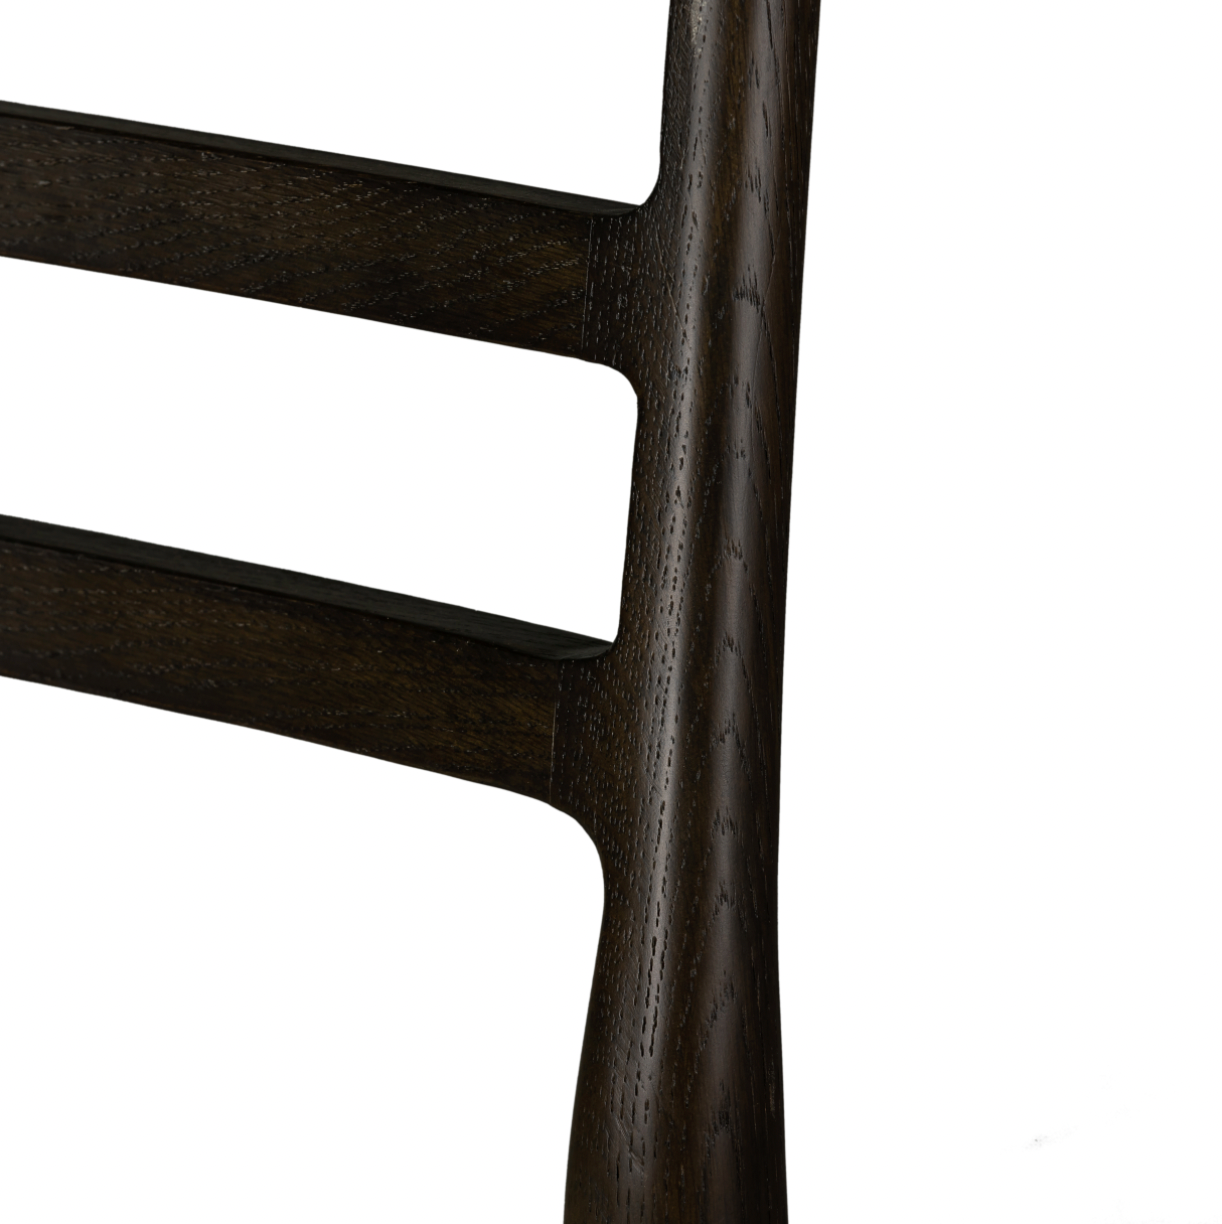 We love the ladderback chair of this Glenmore Light Carbon Dining Chair. The carbon-toned seating blends cotton with linen and elevates the space for any dining room or kitchen area.   Overall Dimensions: 21.75"w x 22.00"d x 34.00"h